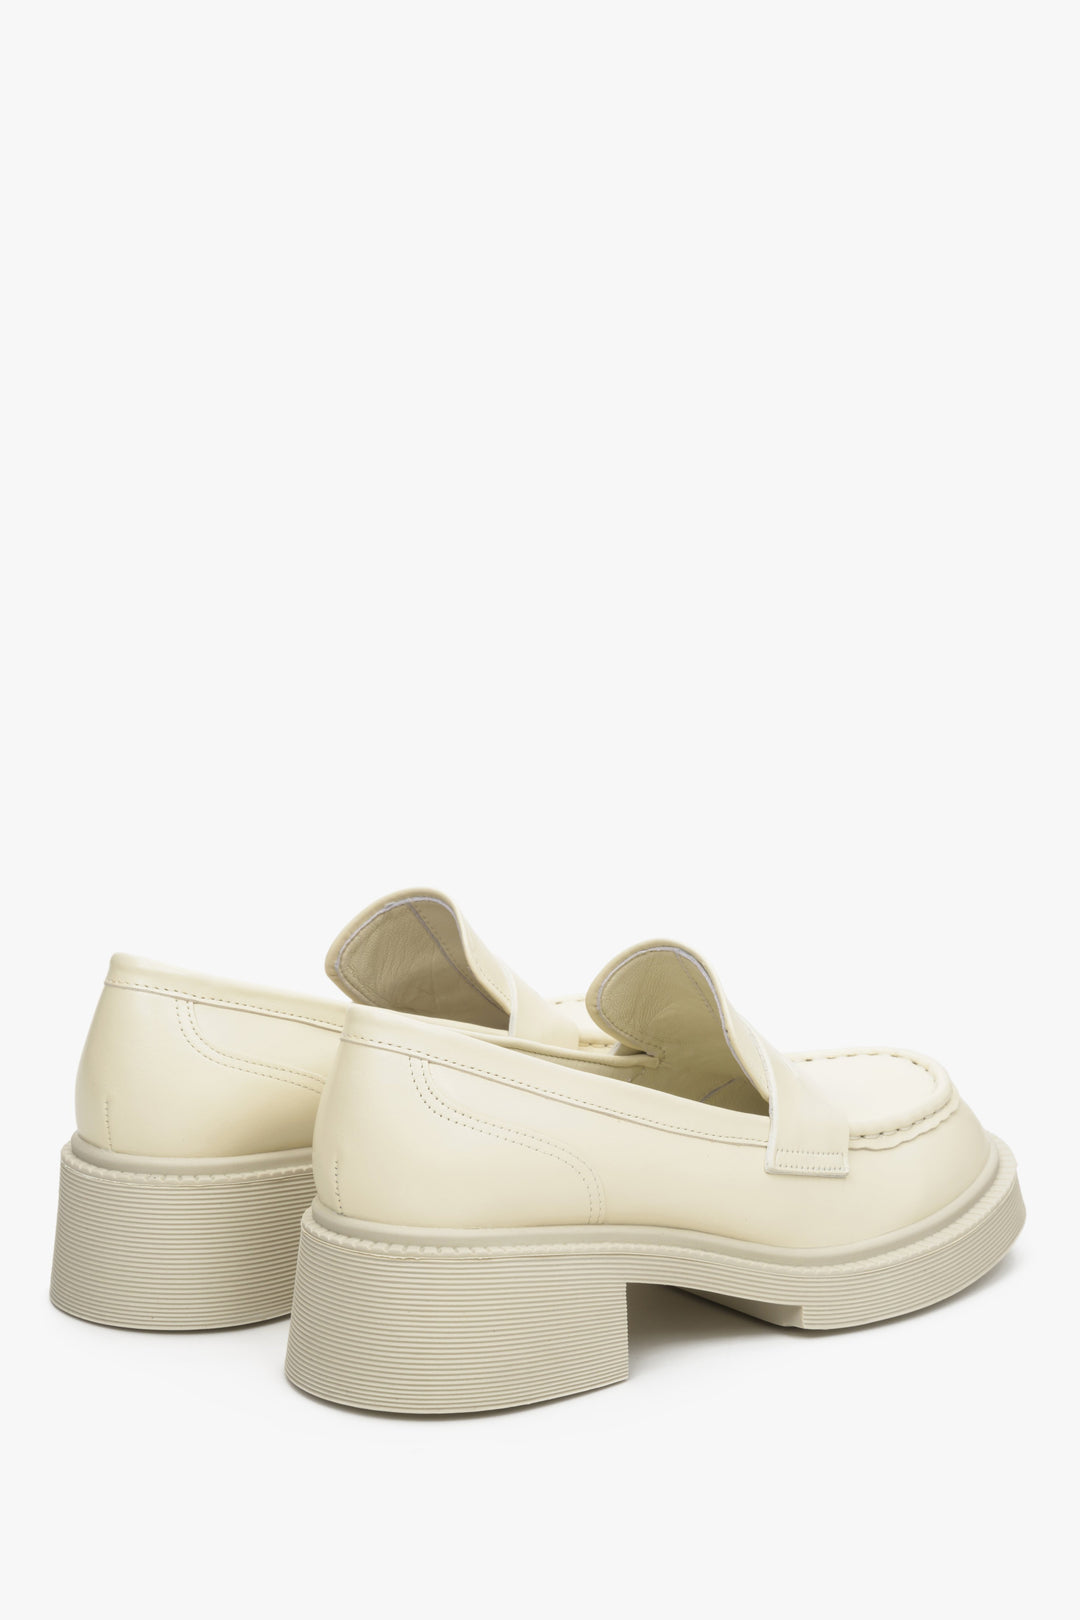 Women's light beige leather moccasin shoes with a stable heel, Estro - close-up on the side line and heel counters.